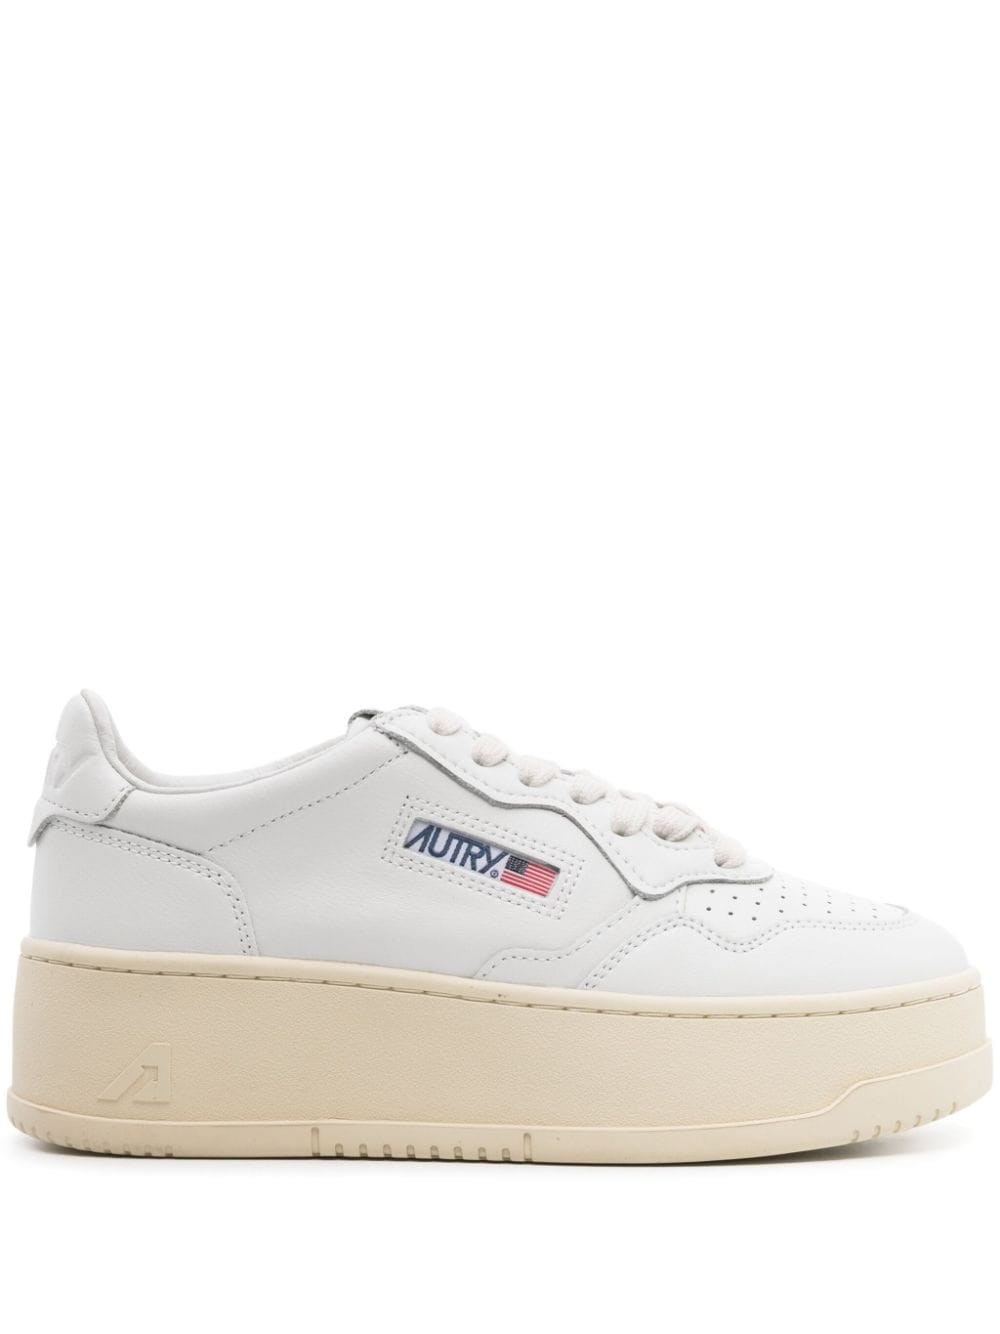 Shop Autry Sneakers Medalist Platform In White